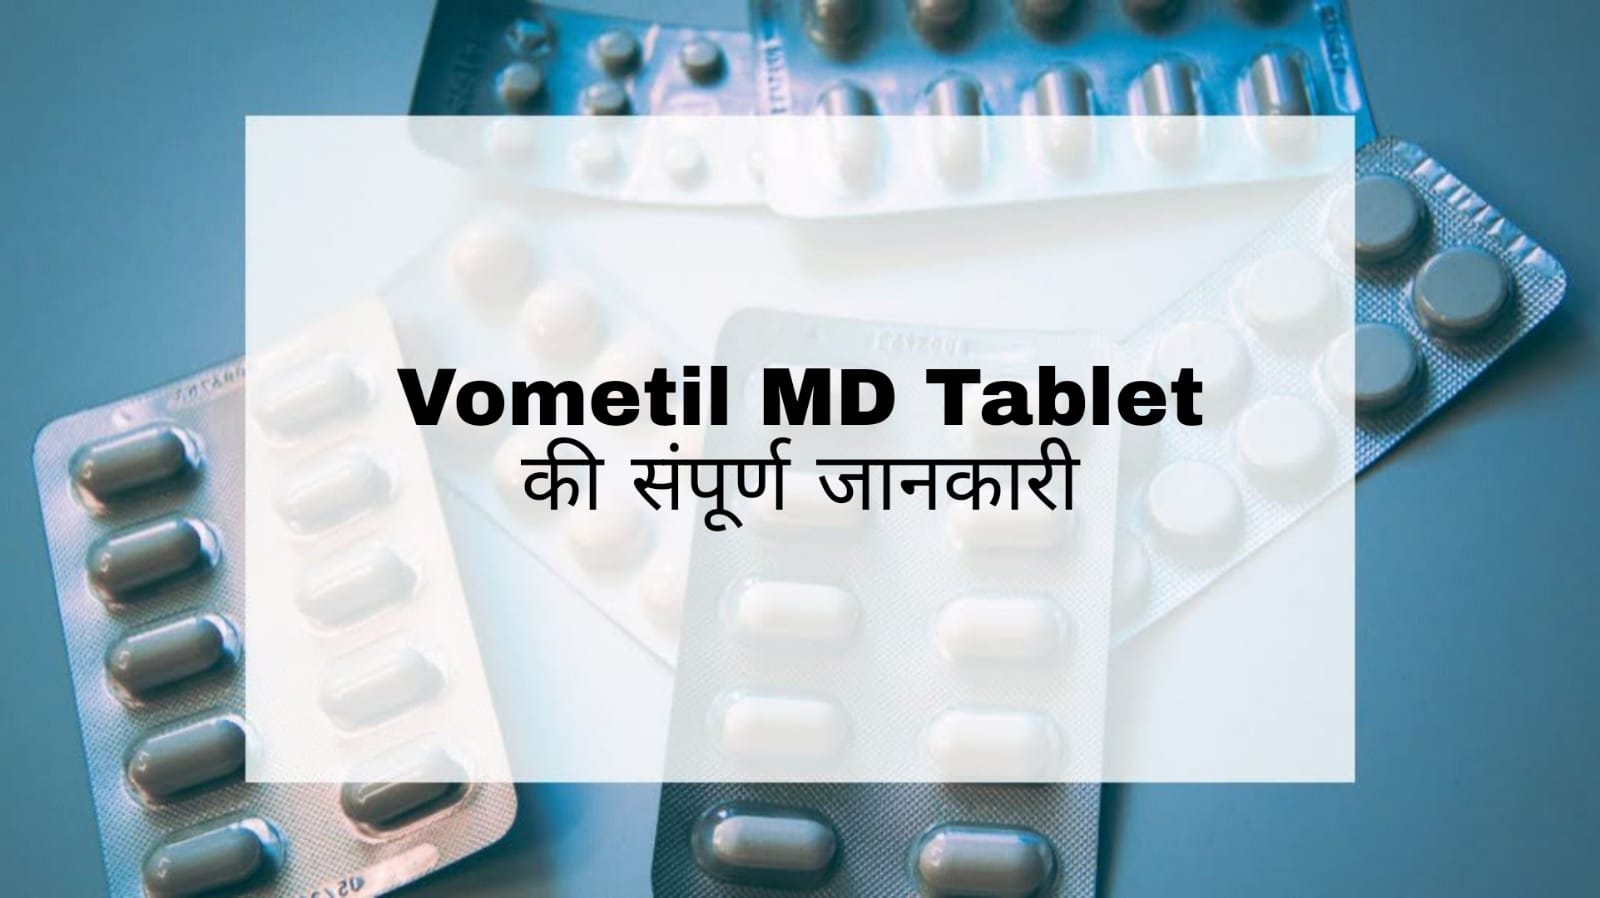 Vometil MD Tablet Uses in Hindi